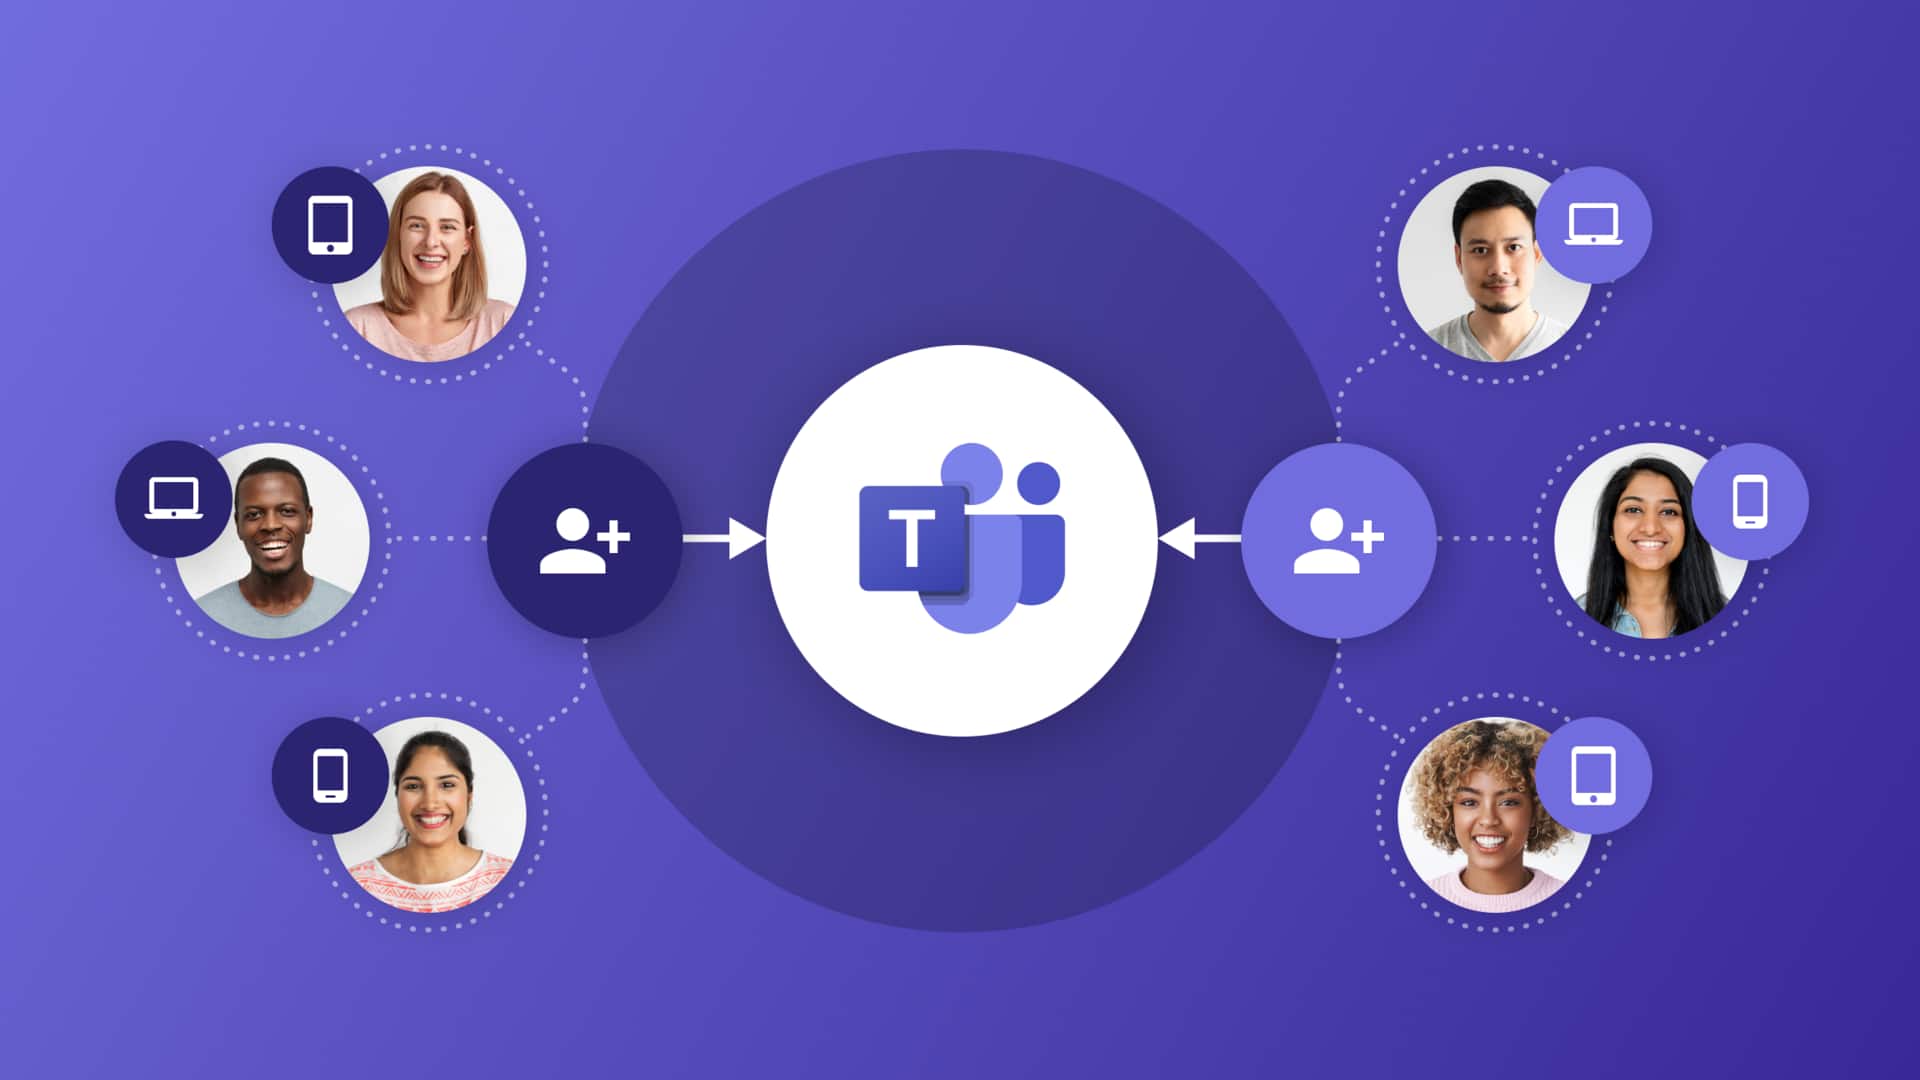 Microsoft Teams is making video calls hassle-free: Here's how